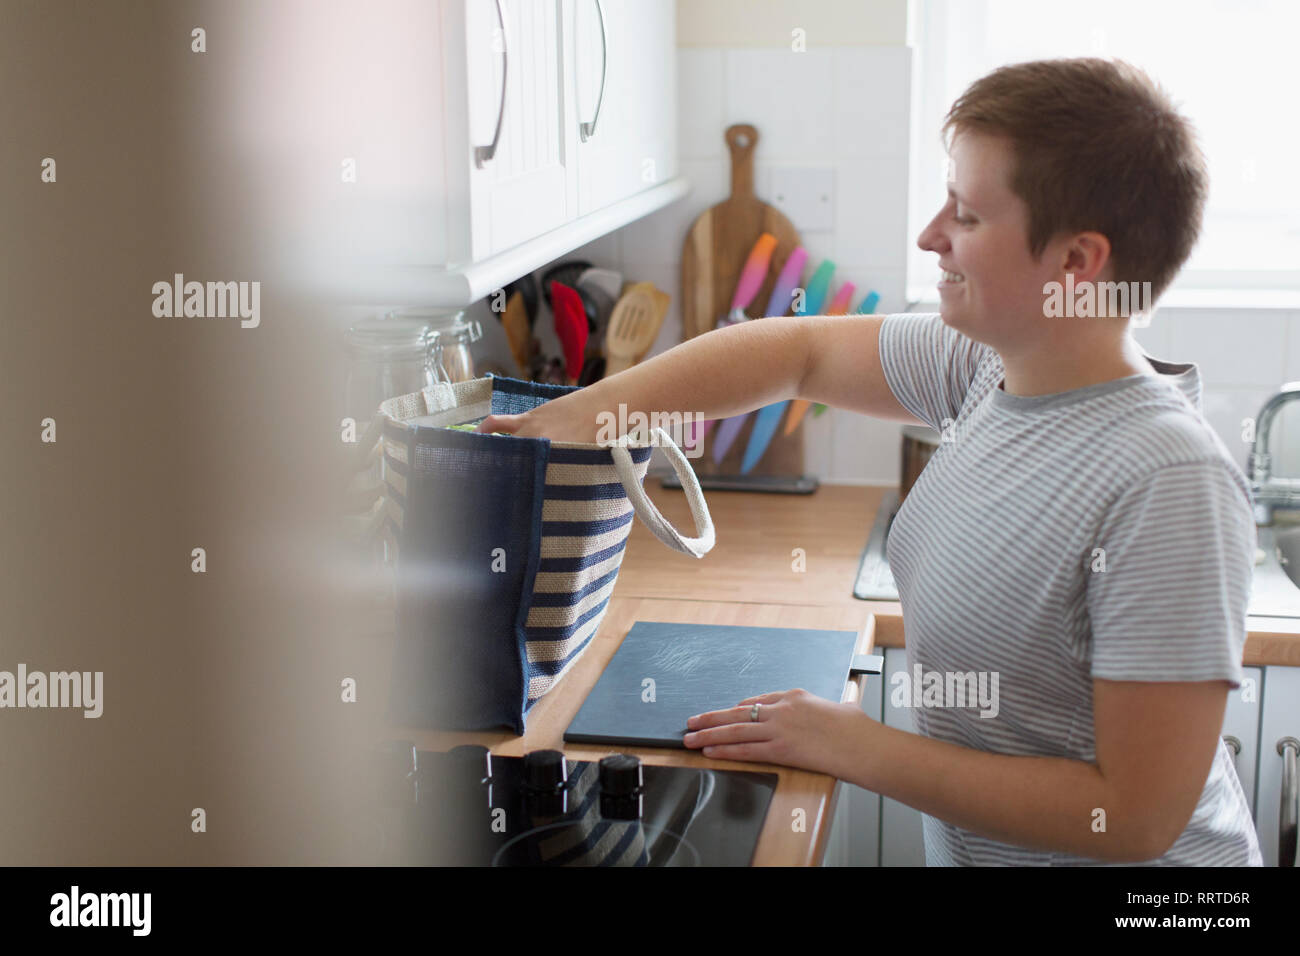 Young woman unpacking groceries in apartment kitchen Stock Photo